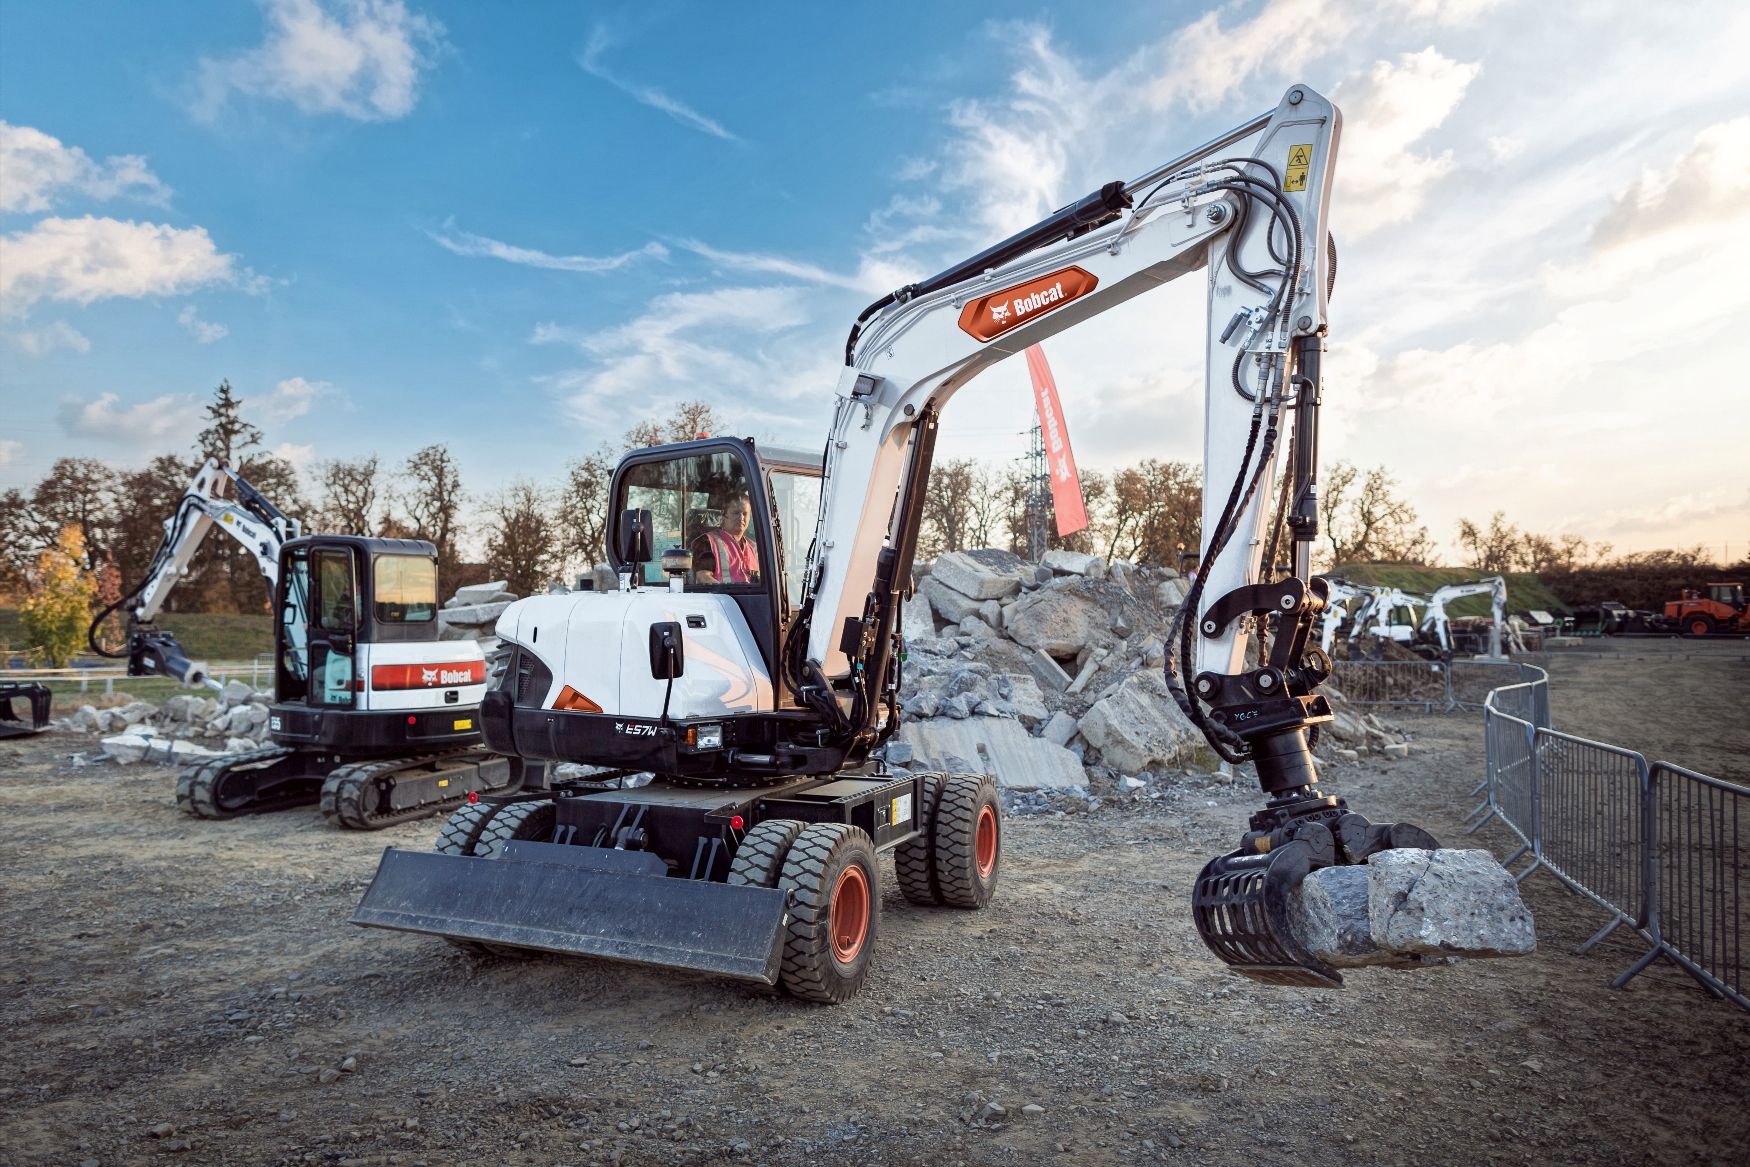 New 6 tonne wheeled excavator released by Bobcat